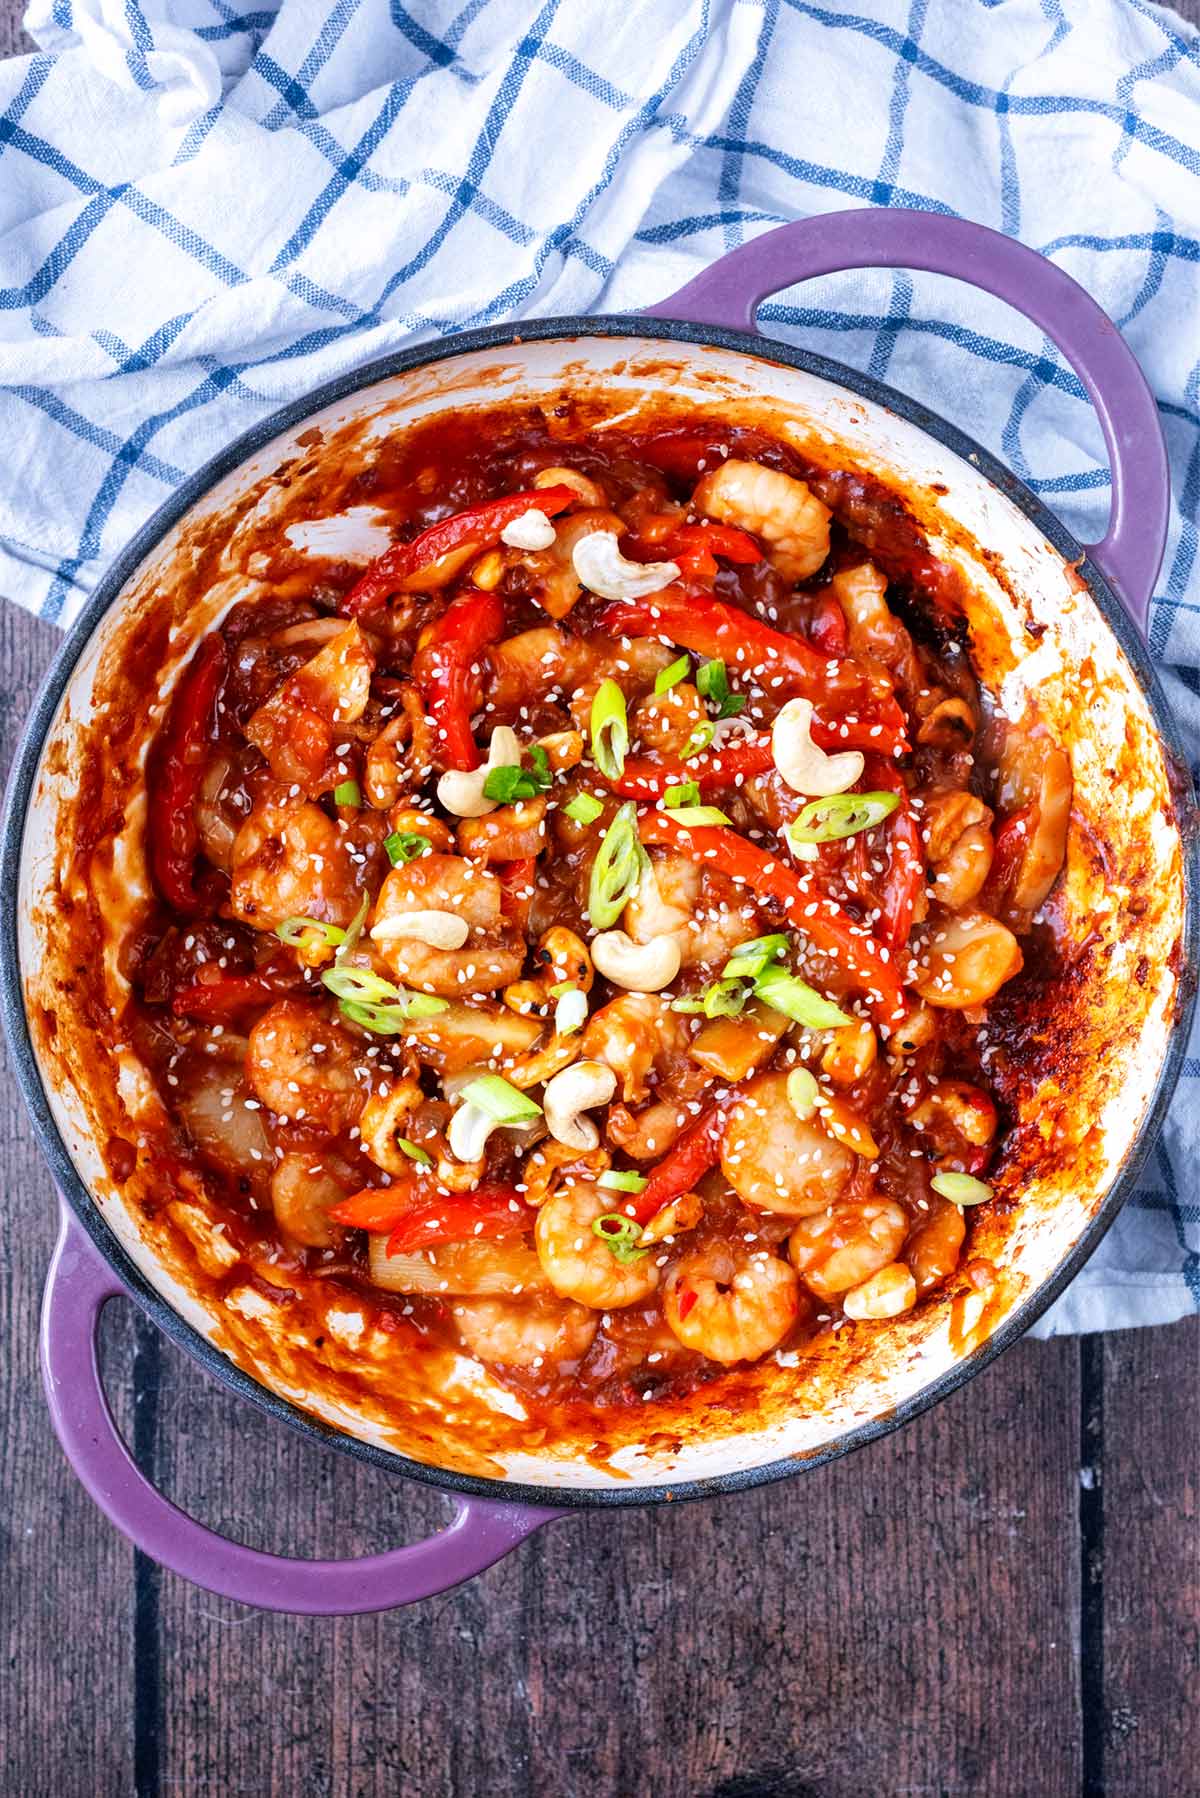 A large pan of cooked prawns and vegetables in a red sauce.